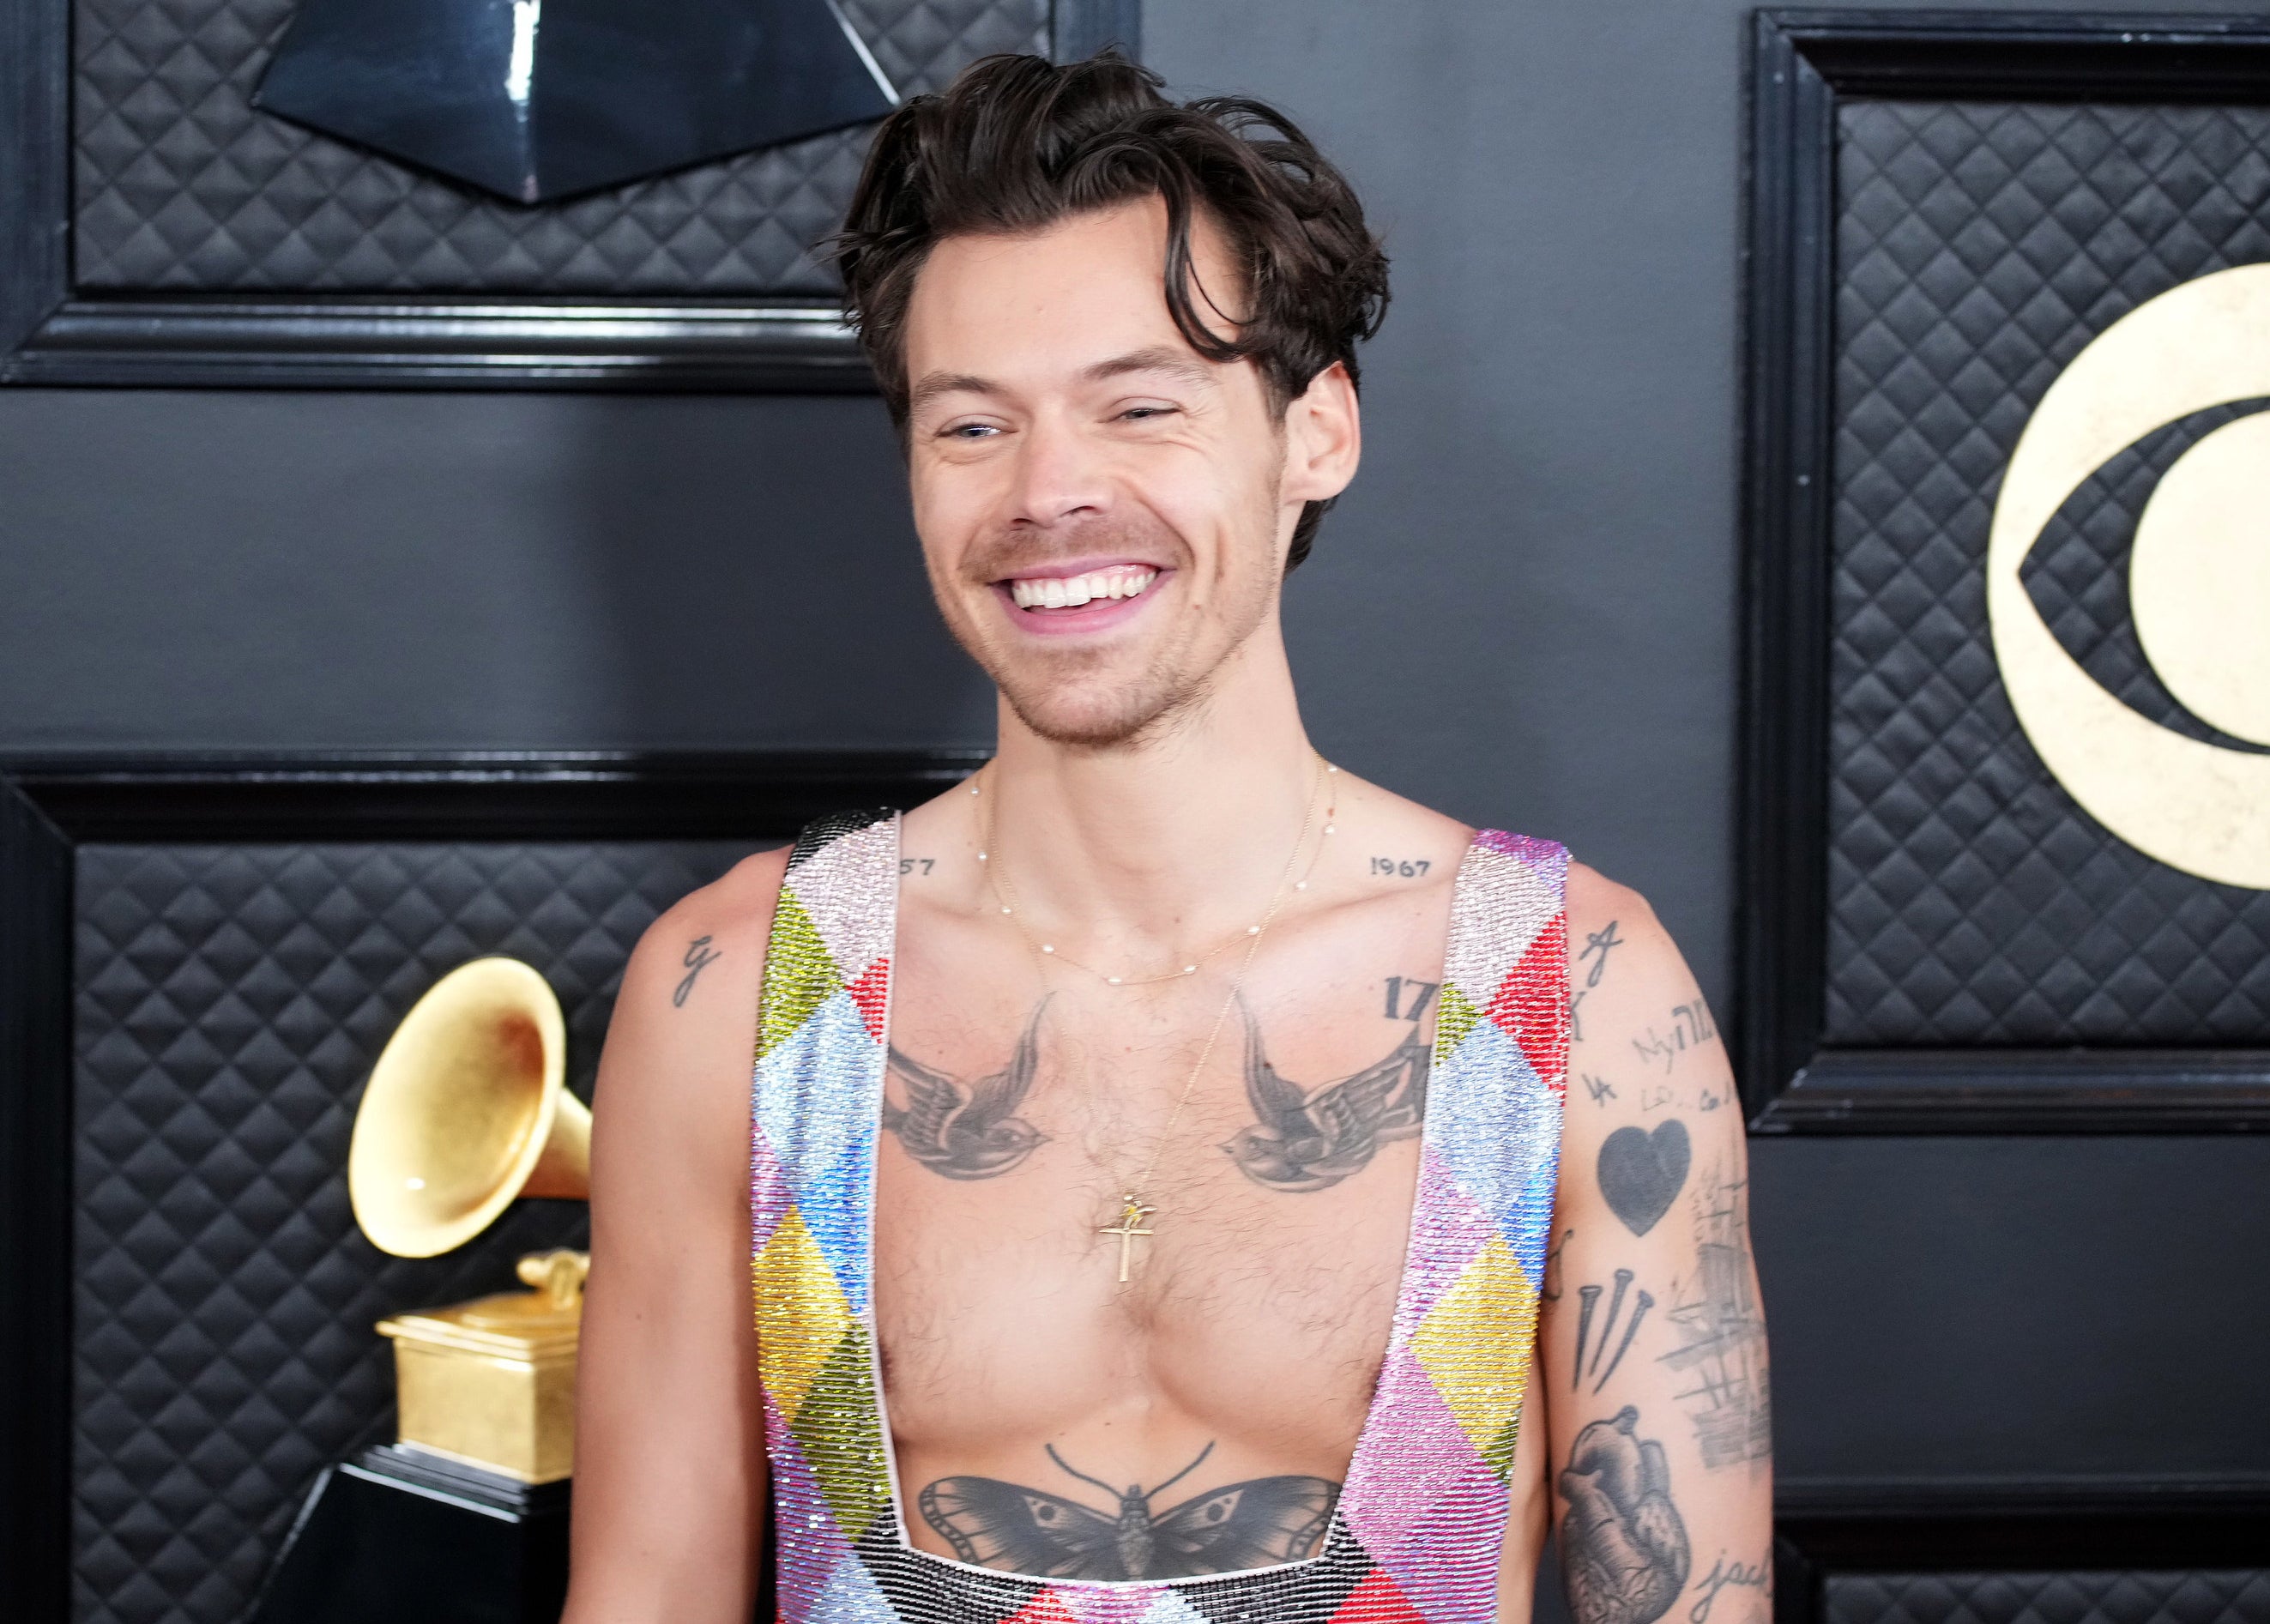 Harry smiling in colorful overalls and bare-chested